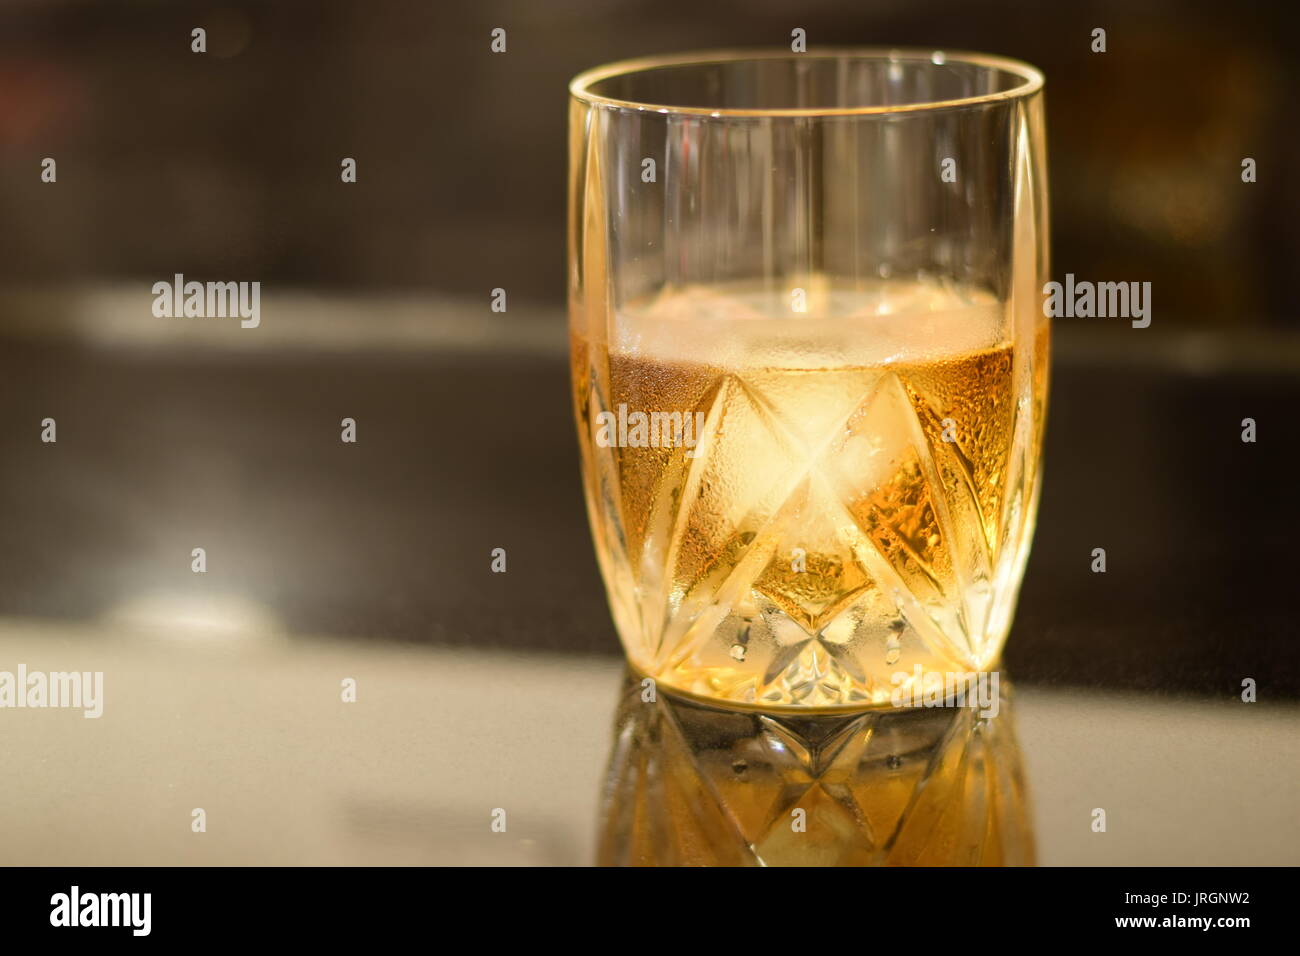 Gold and amber colored Whiskey on the rocks a in a crystal glass, with a giant melting cube of ice on a black granite bar. Stock Photo